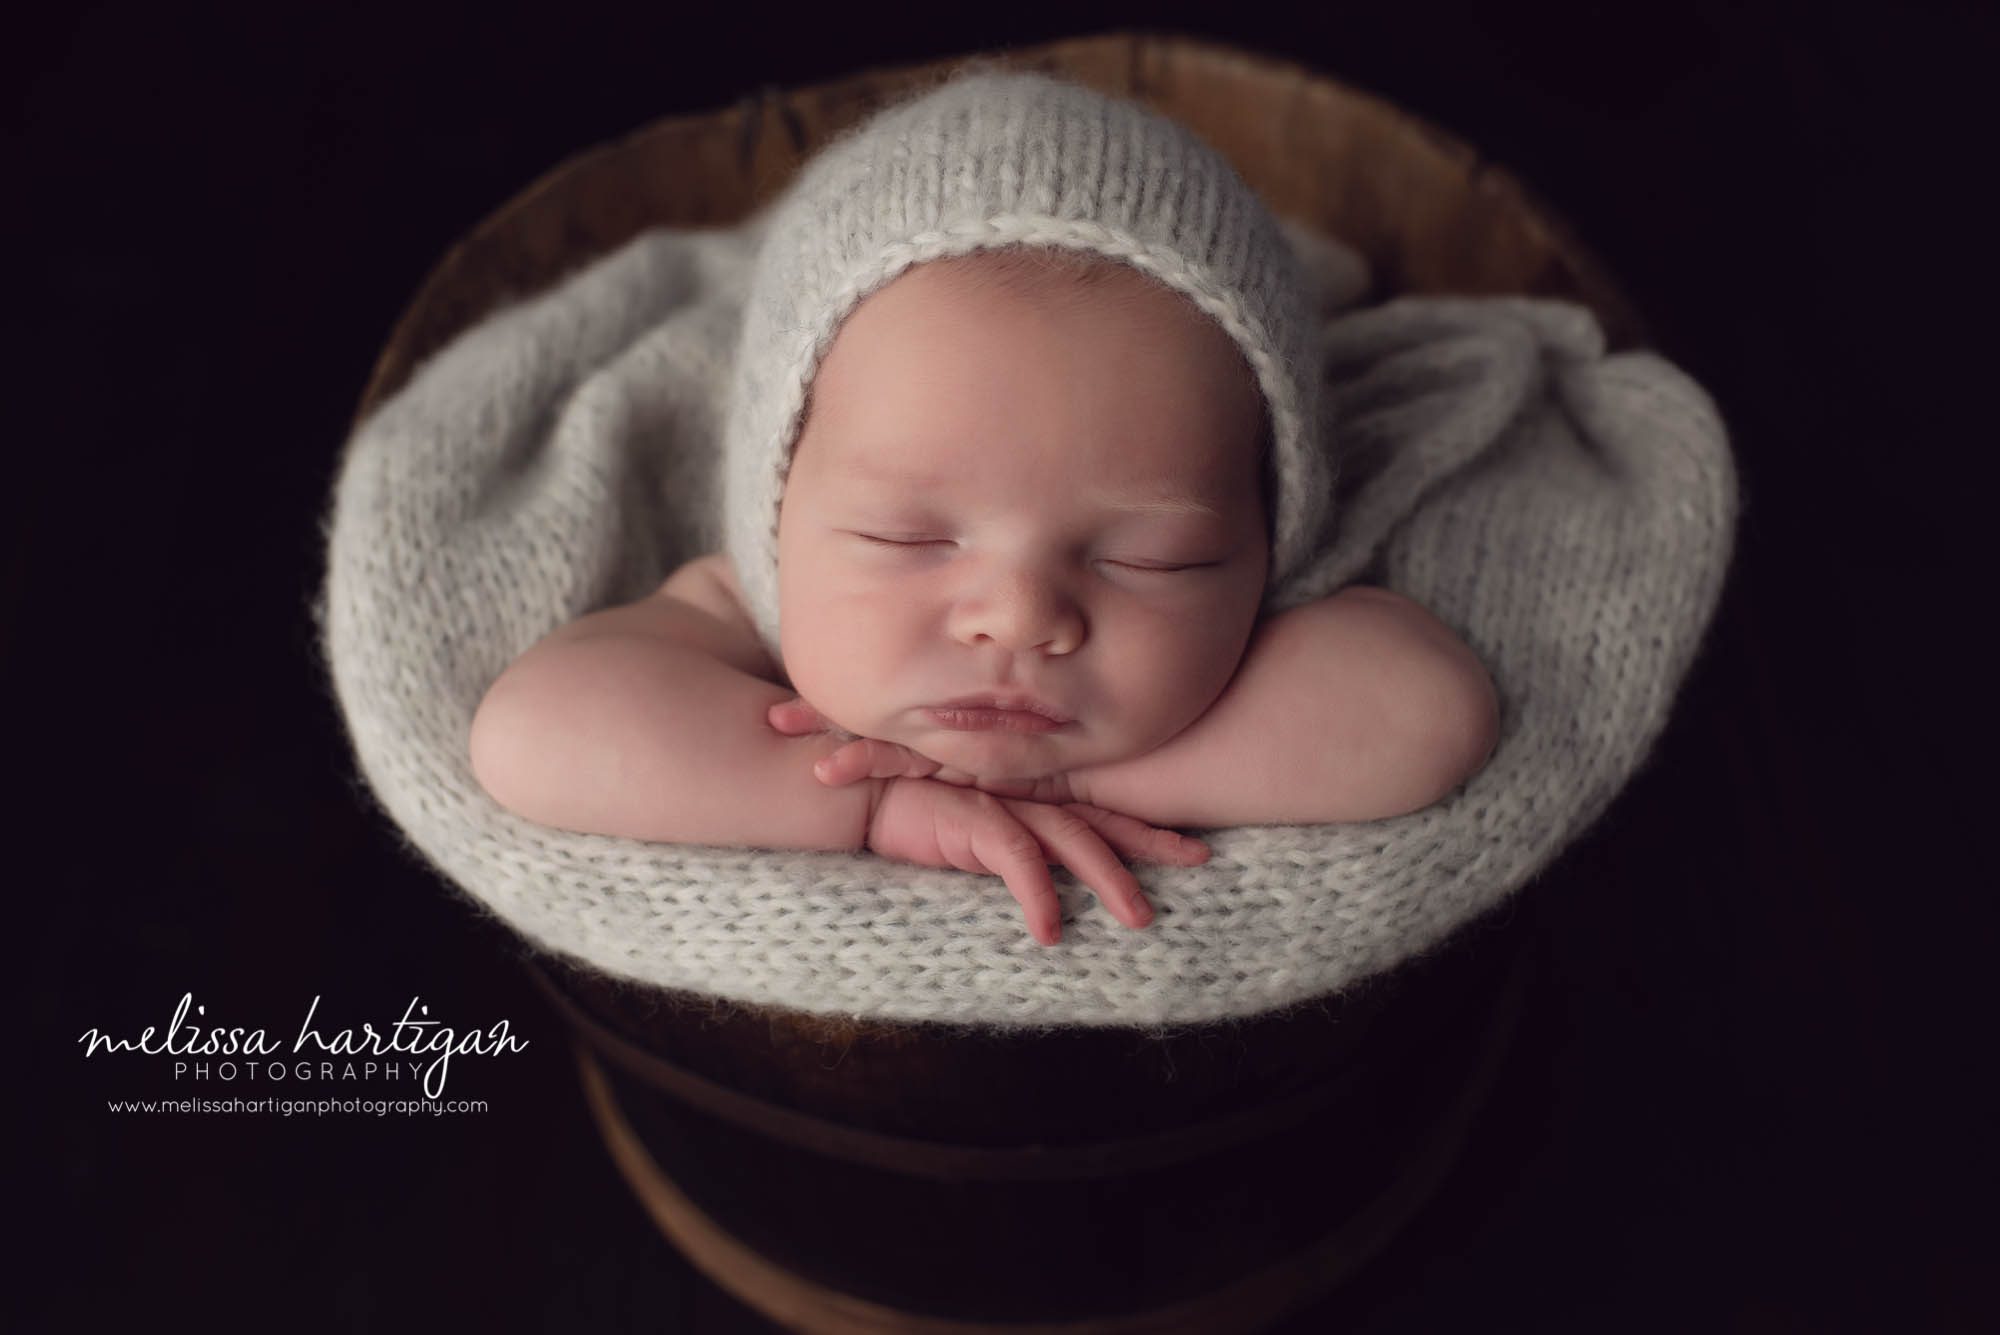 newborn baby posed in bucket with neutral color knitted wrap and bonnet